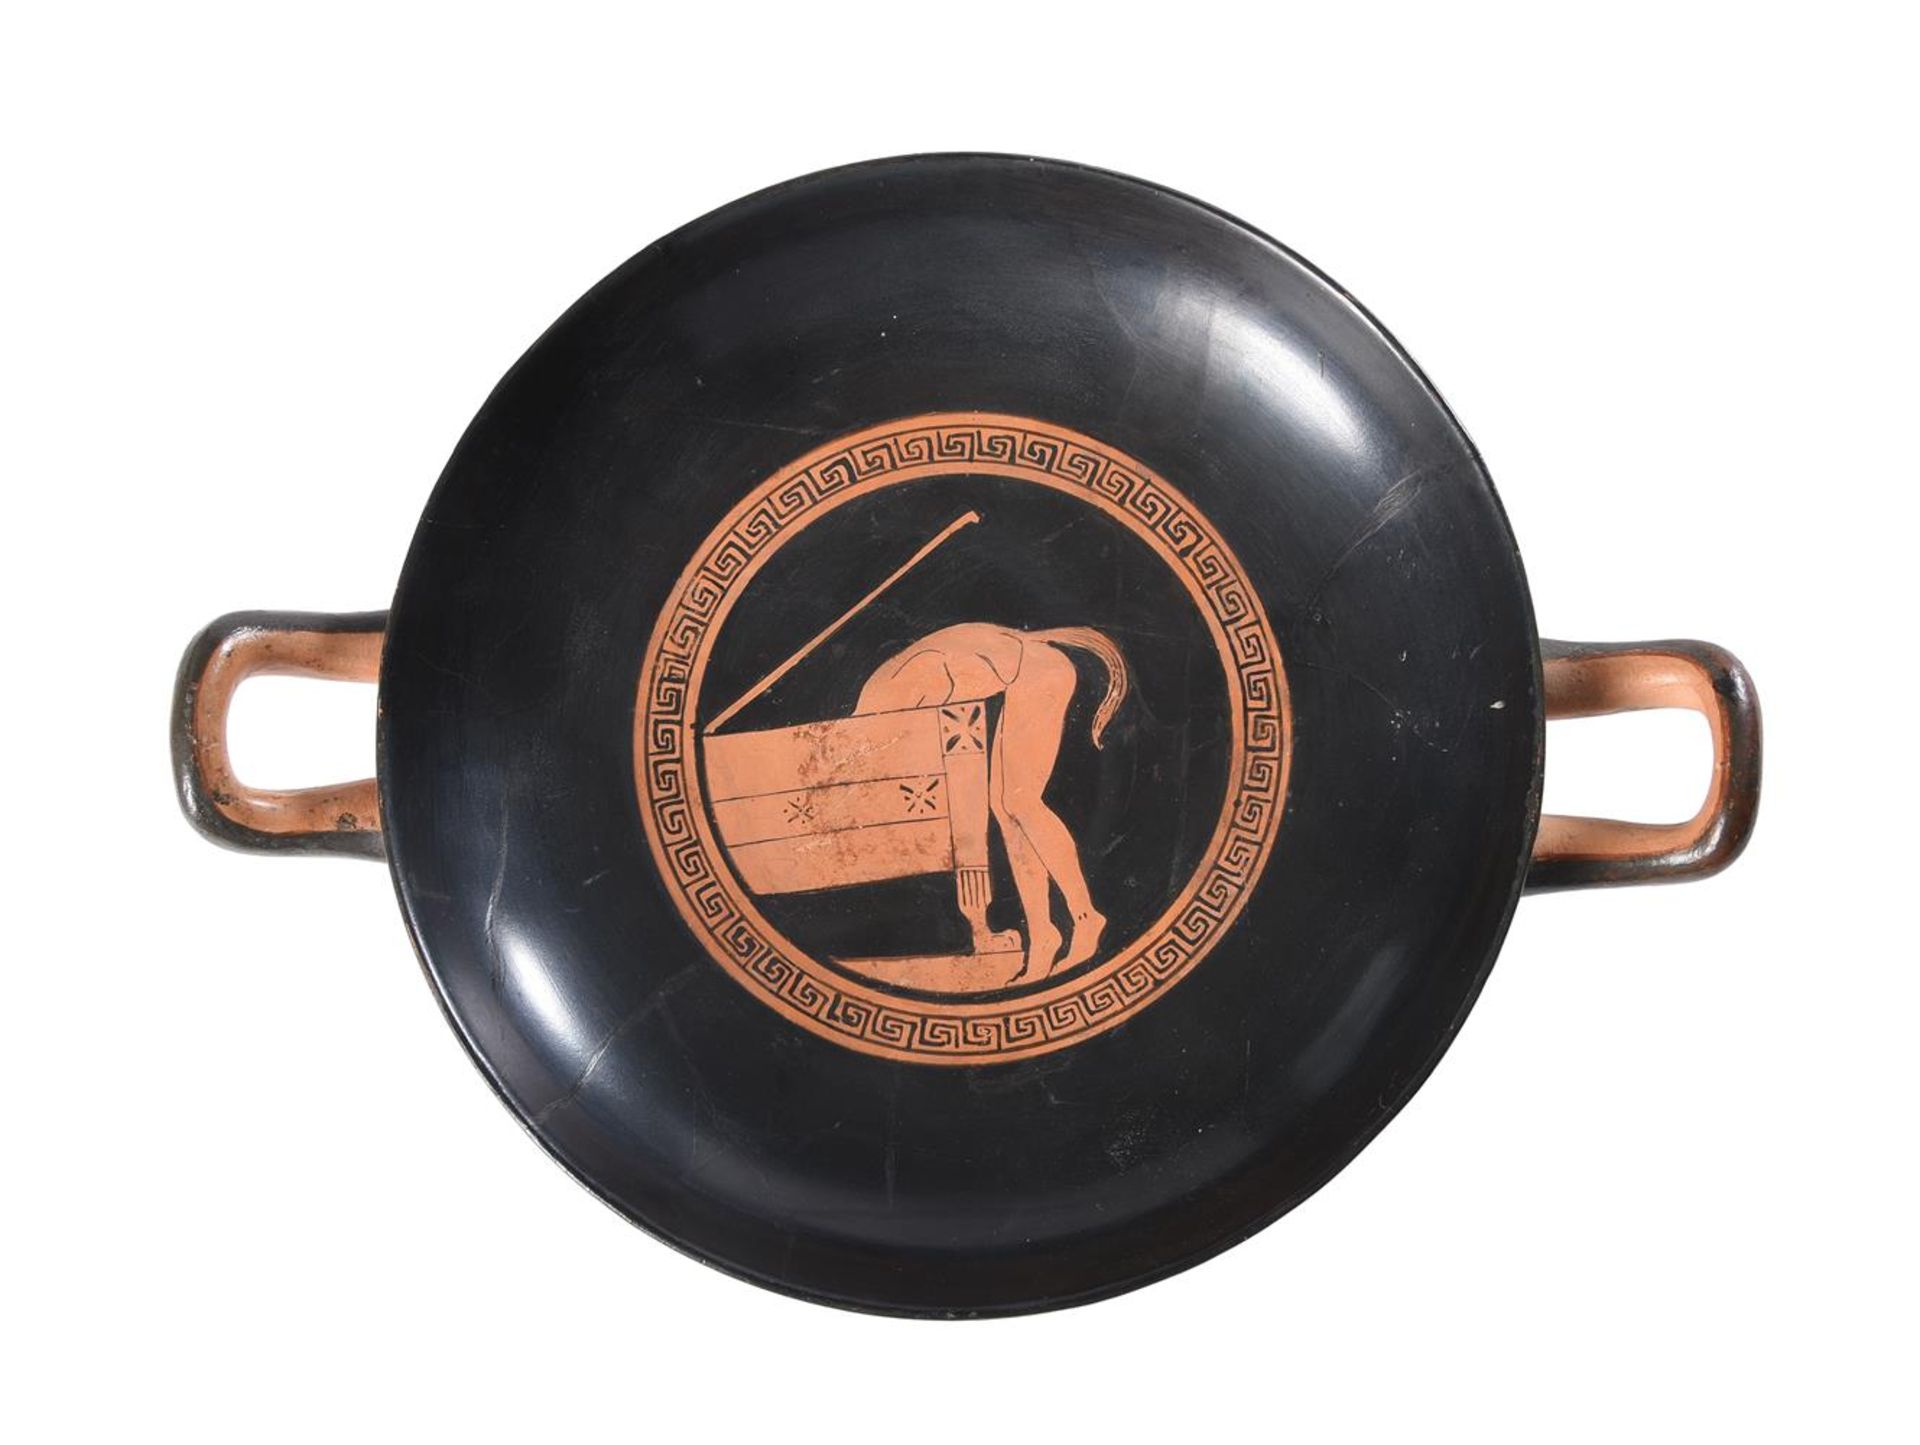 AN ATTIC RED-FIGURE POTTERY KYLIX, PROBABLY THE PAINTER OF ATHENS 1237, CIRCA 470-460 B.C. - Image 2 of 3